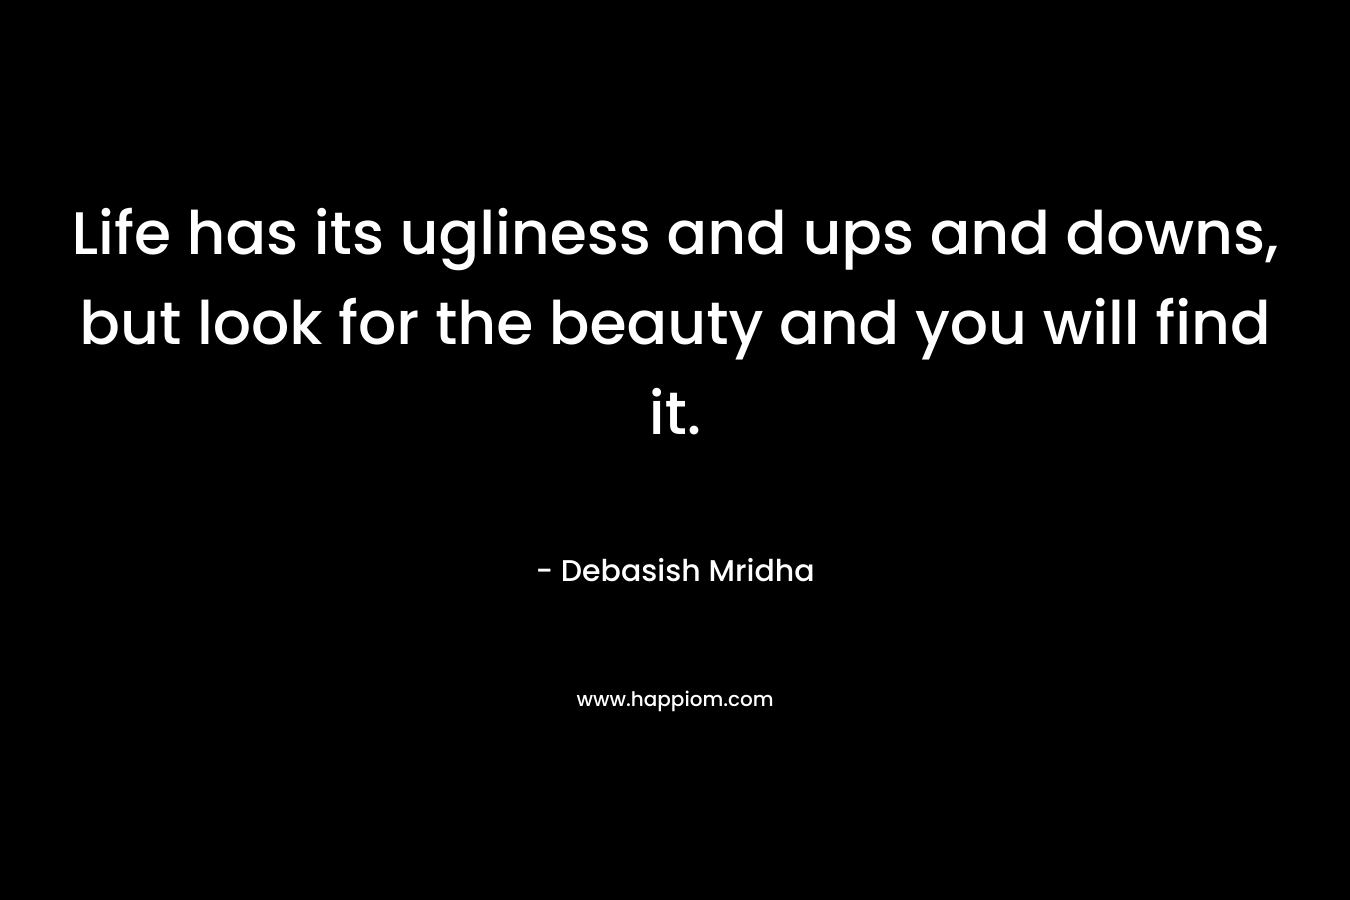 Life has its ugliness and ups and downs, but look for the beauty and you will find it. – Debasish Mridha